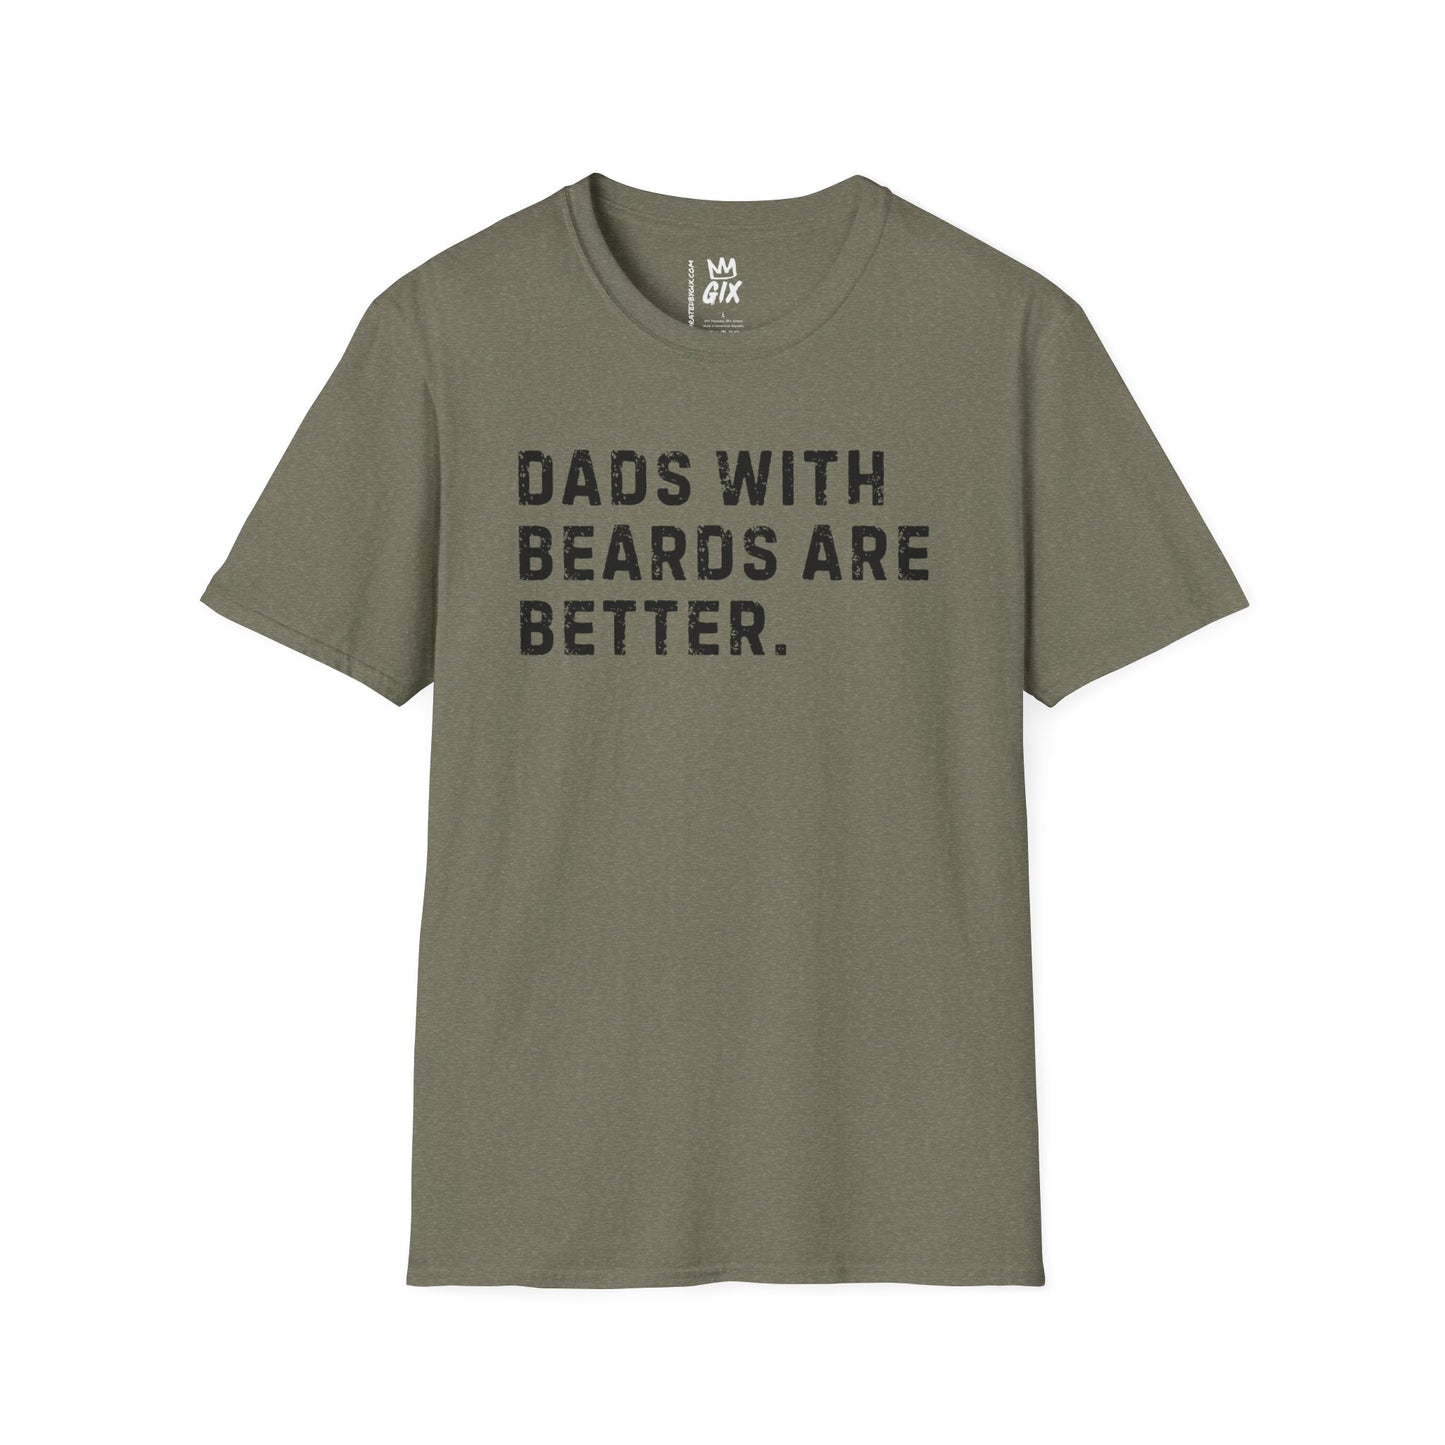 Dads with Beards Are Better - Heather T-Shirt - Ultra-Soft Cotton-Poly Blend, Unisex Classic Fit